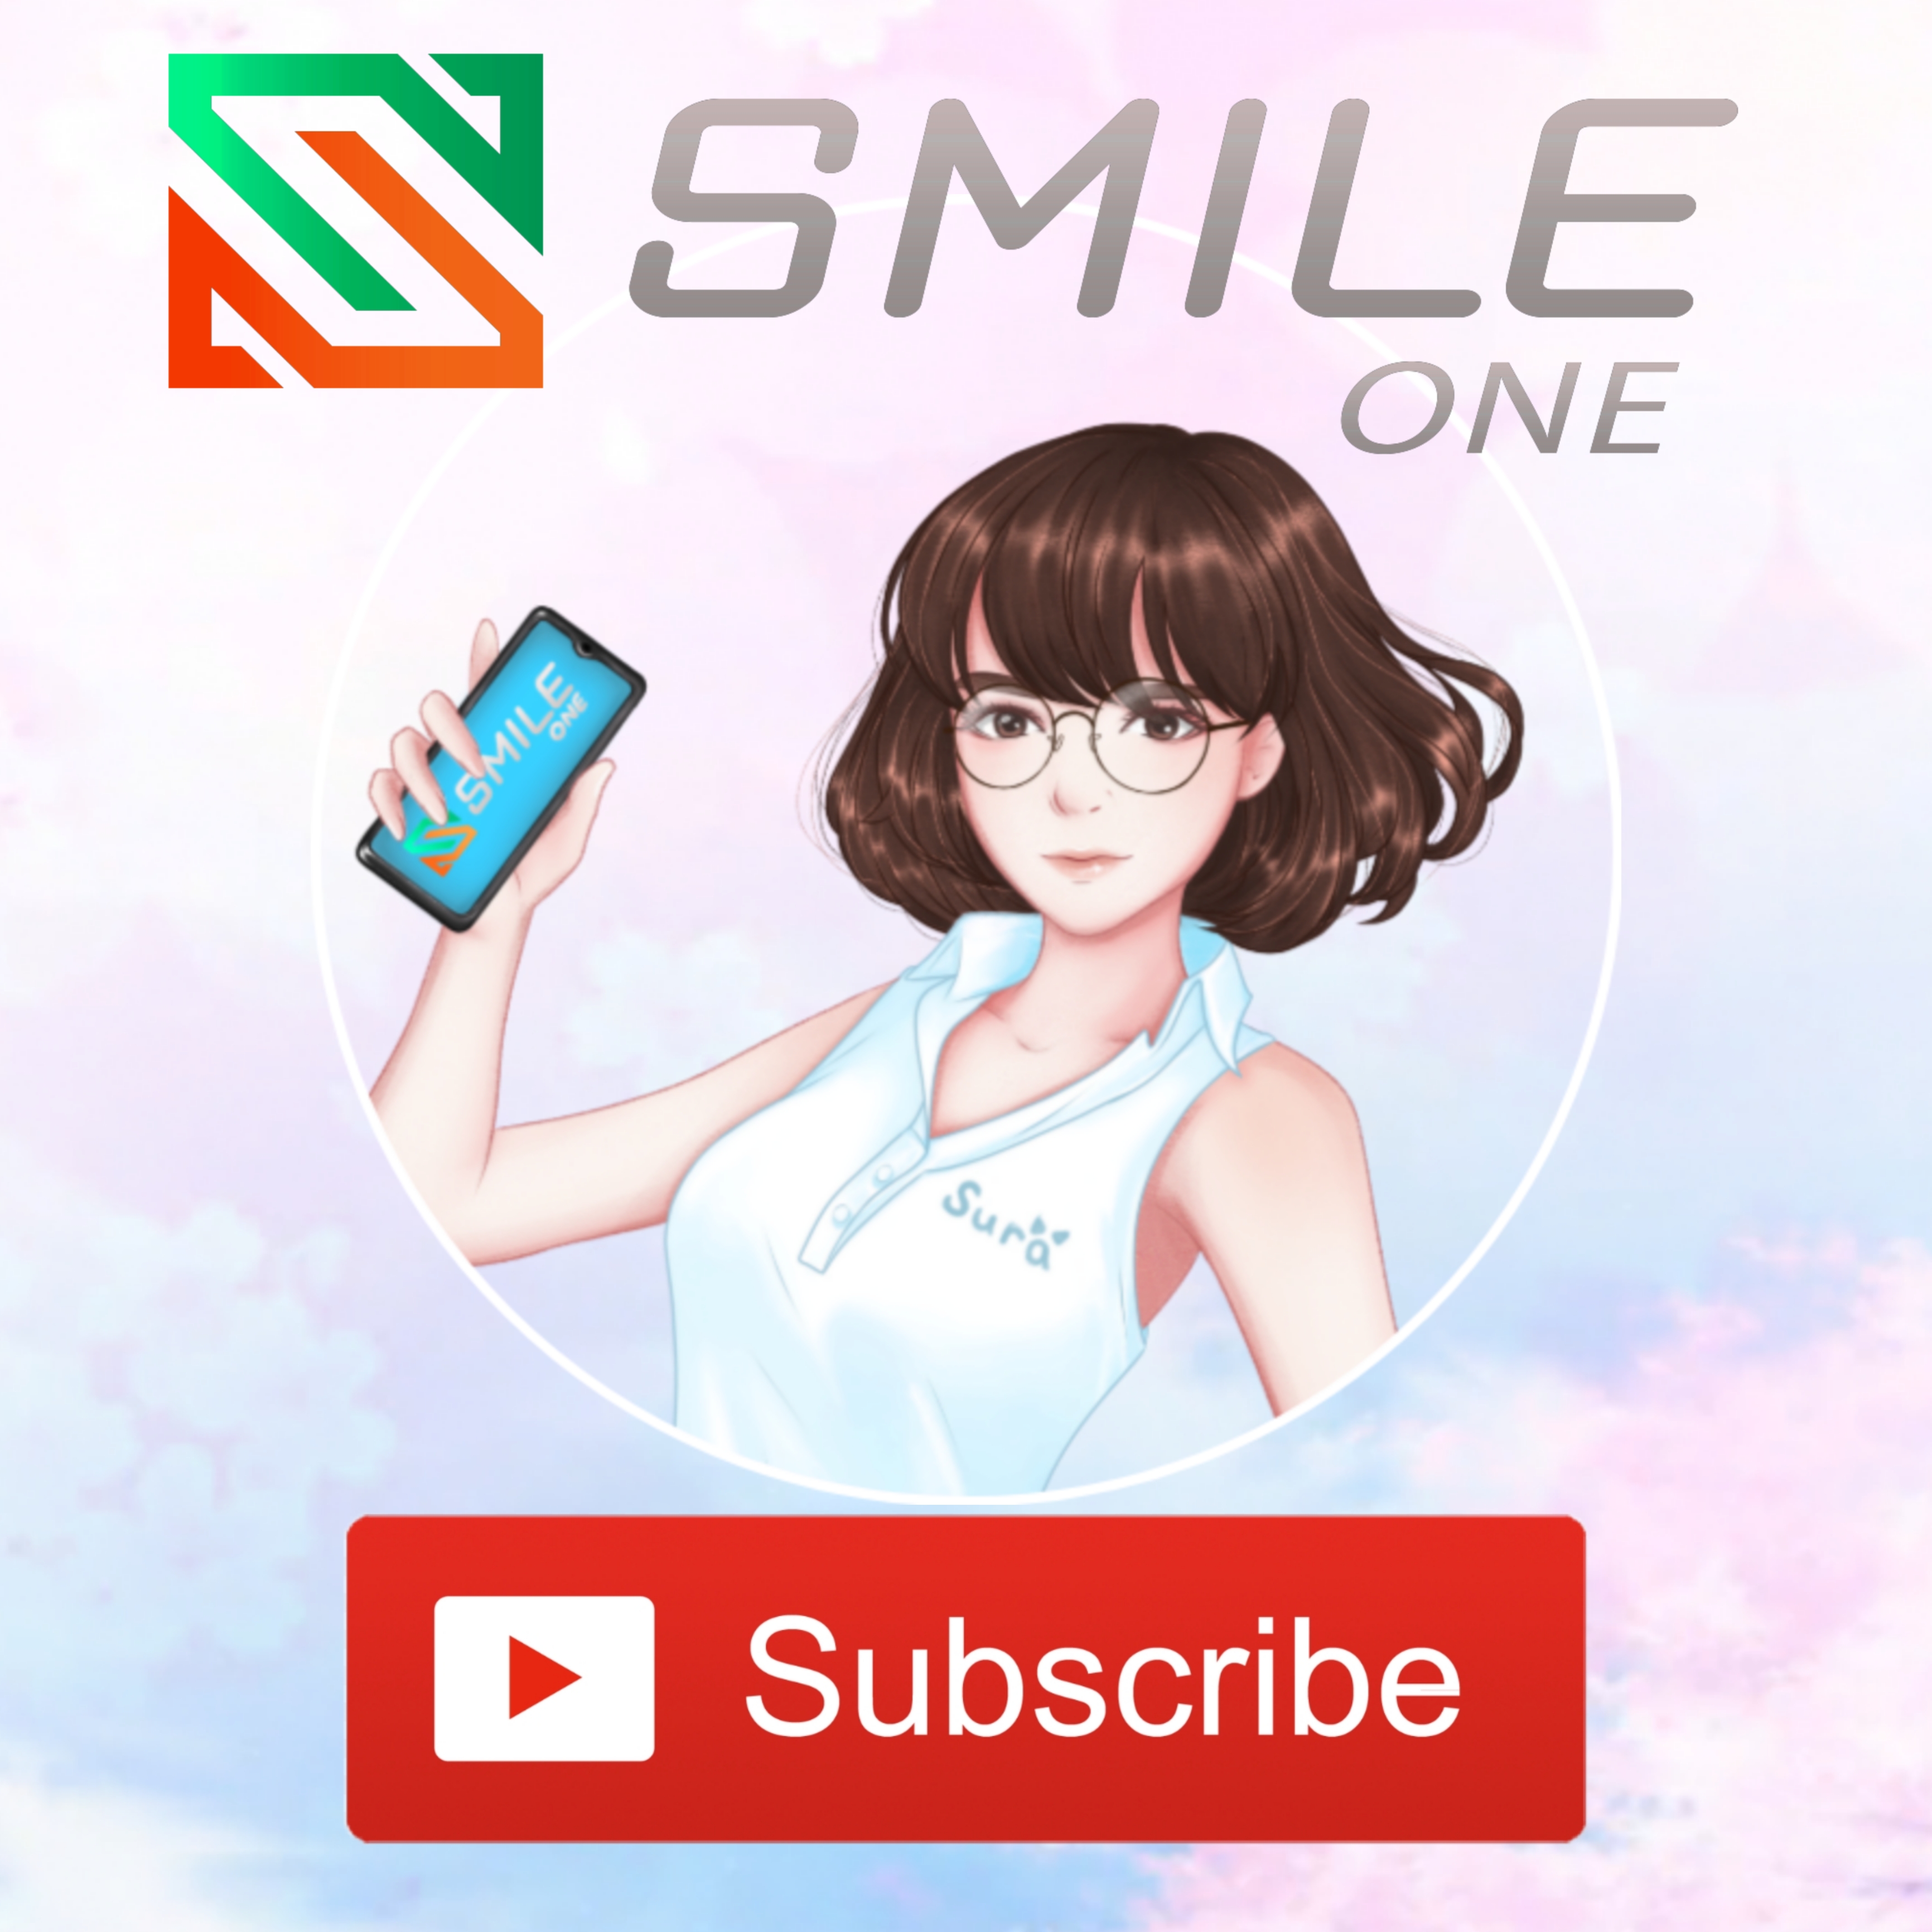 Smile.one limited time promotion